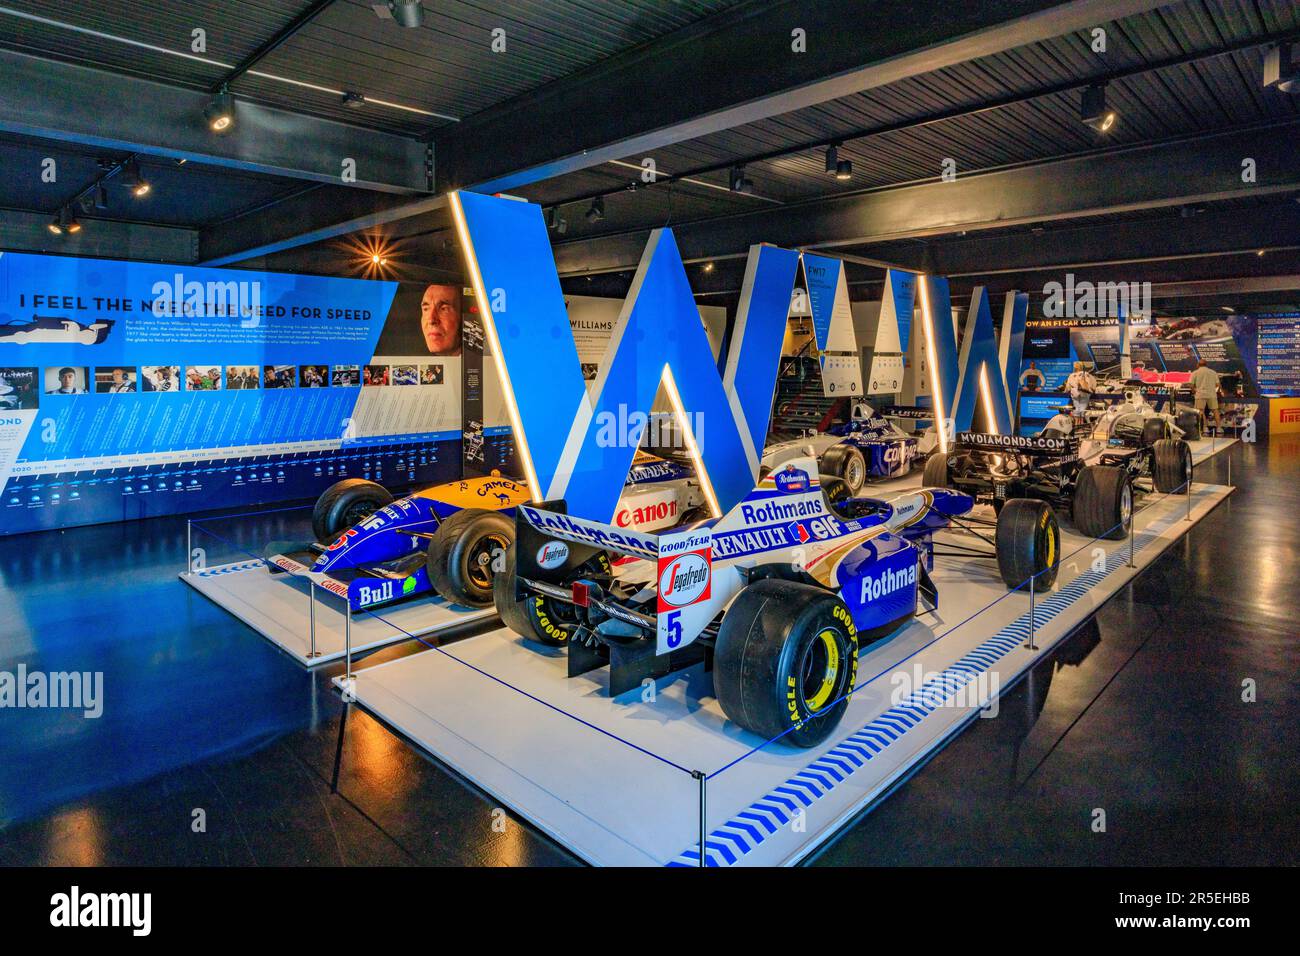 Damon Hill's car in the Williams F1 Room at the Haynes International Motor Museum, Sparkford, Somerset, UK Stock Photo